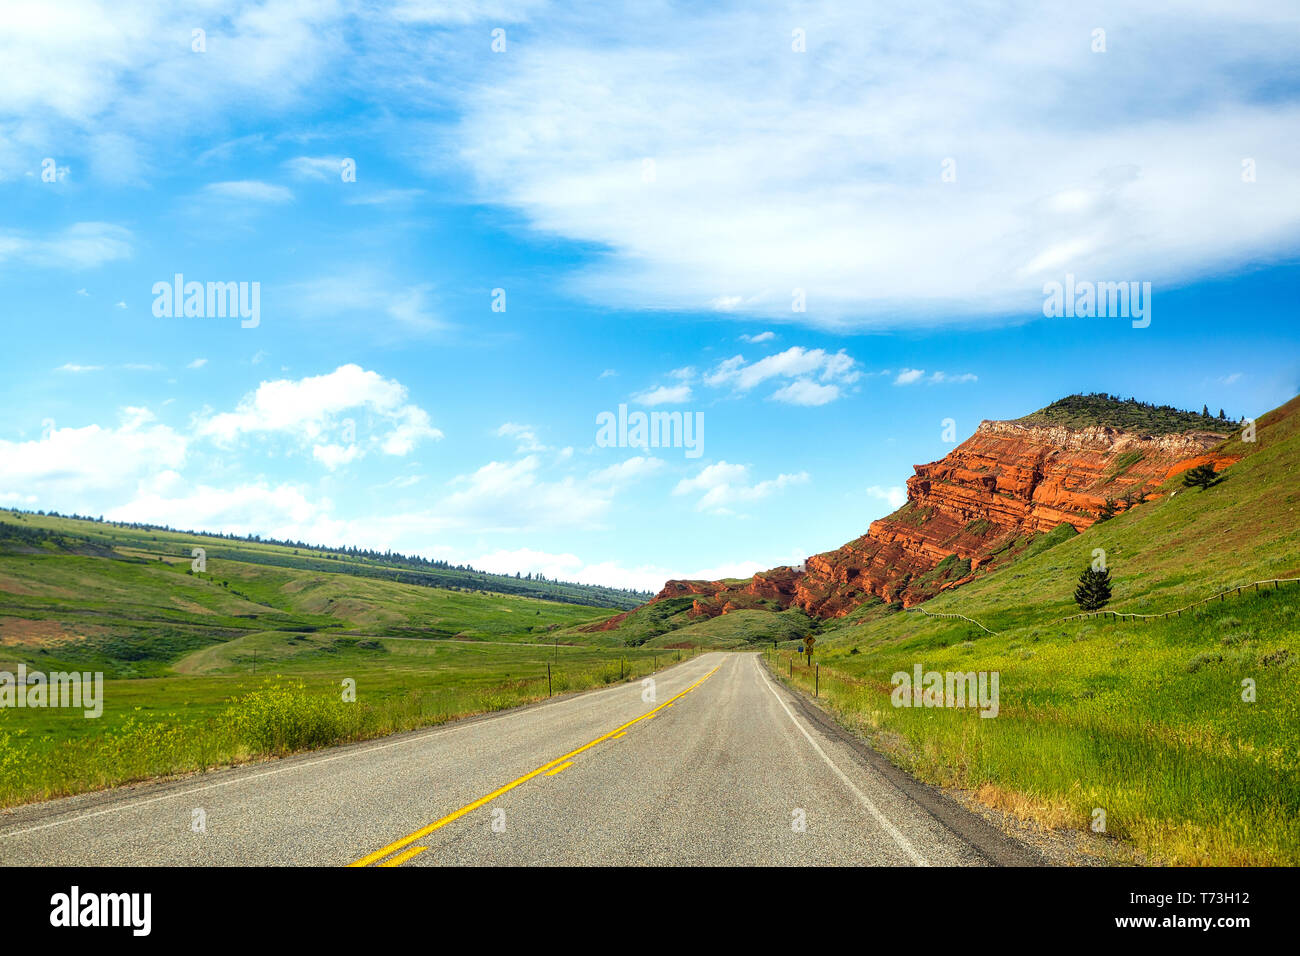 Tiered red rock formation jutting toward a winding highway between rolling hills along Chief Joseph scenic highway in a summer time Montana landscape Stock Photo